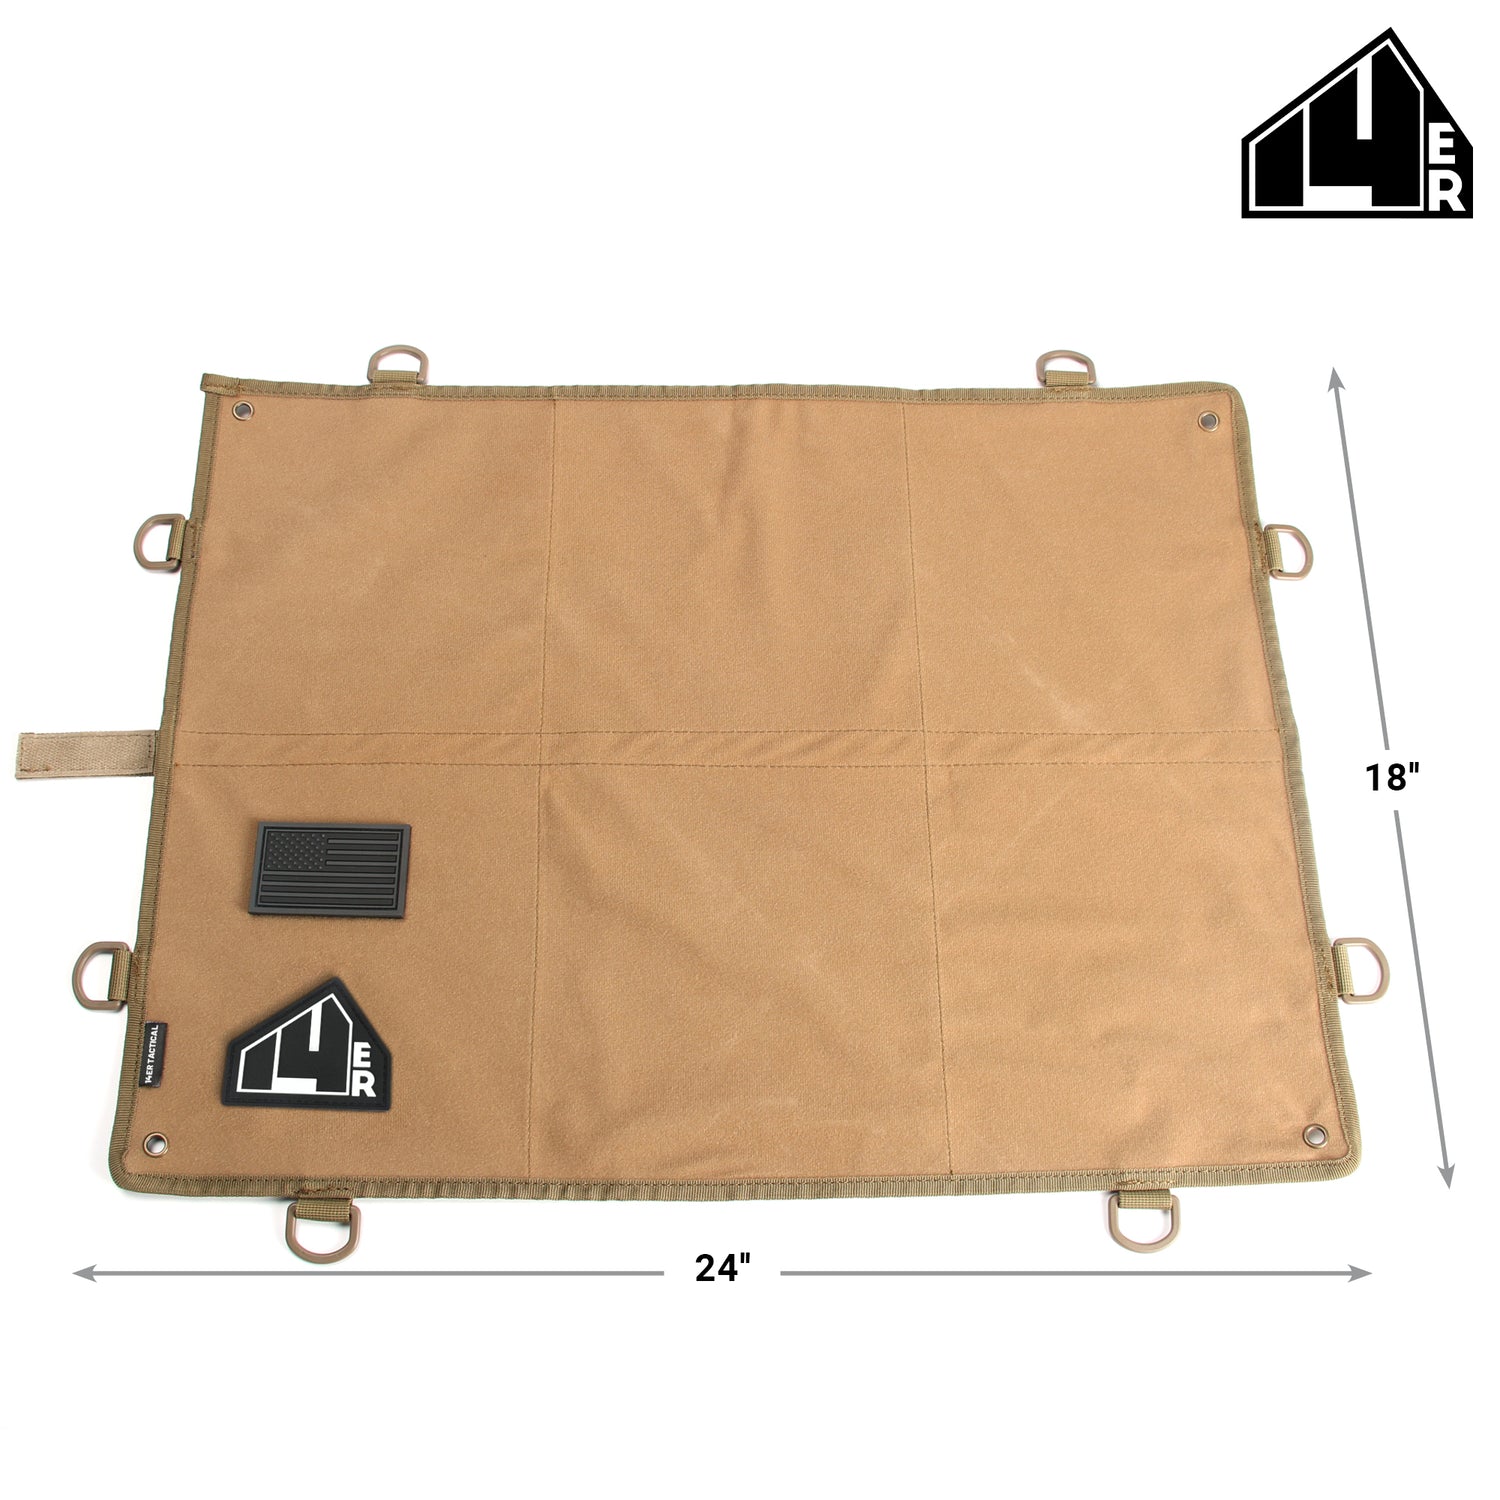 Tactical Patch Display Board 18 x 24 Foldable Panel Holder for Military  Morale Hook and Loop Emblems